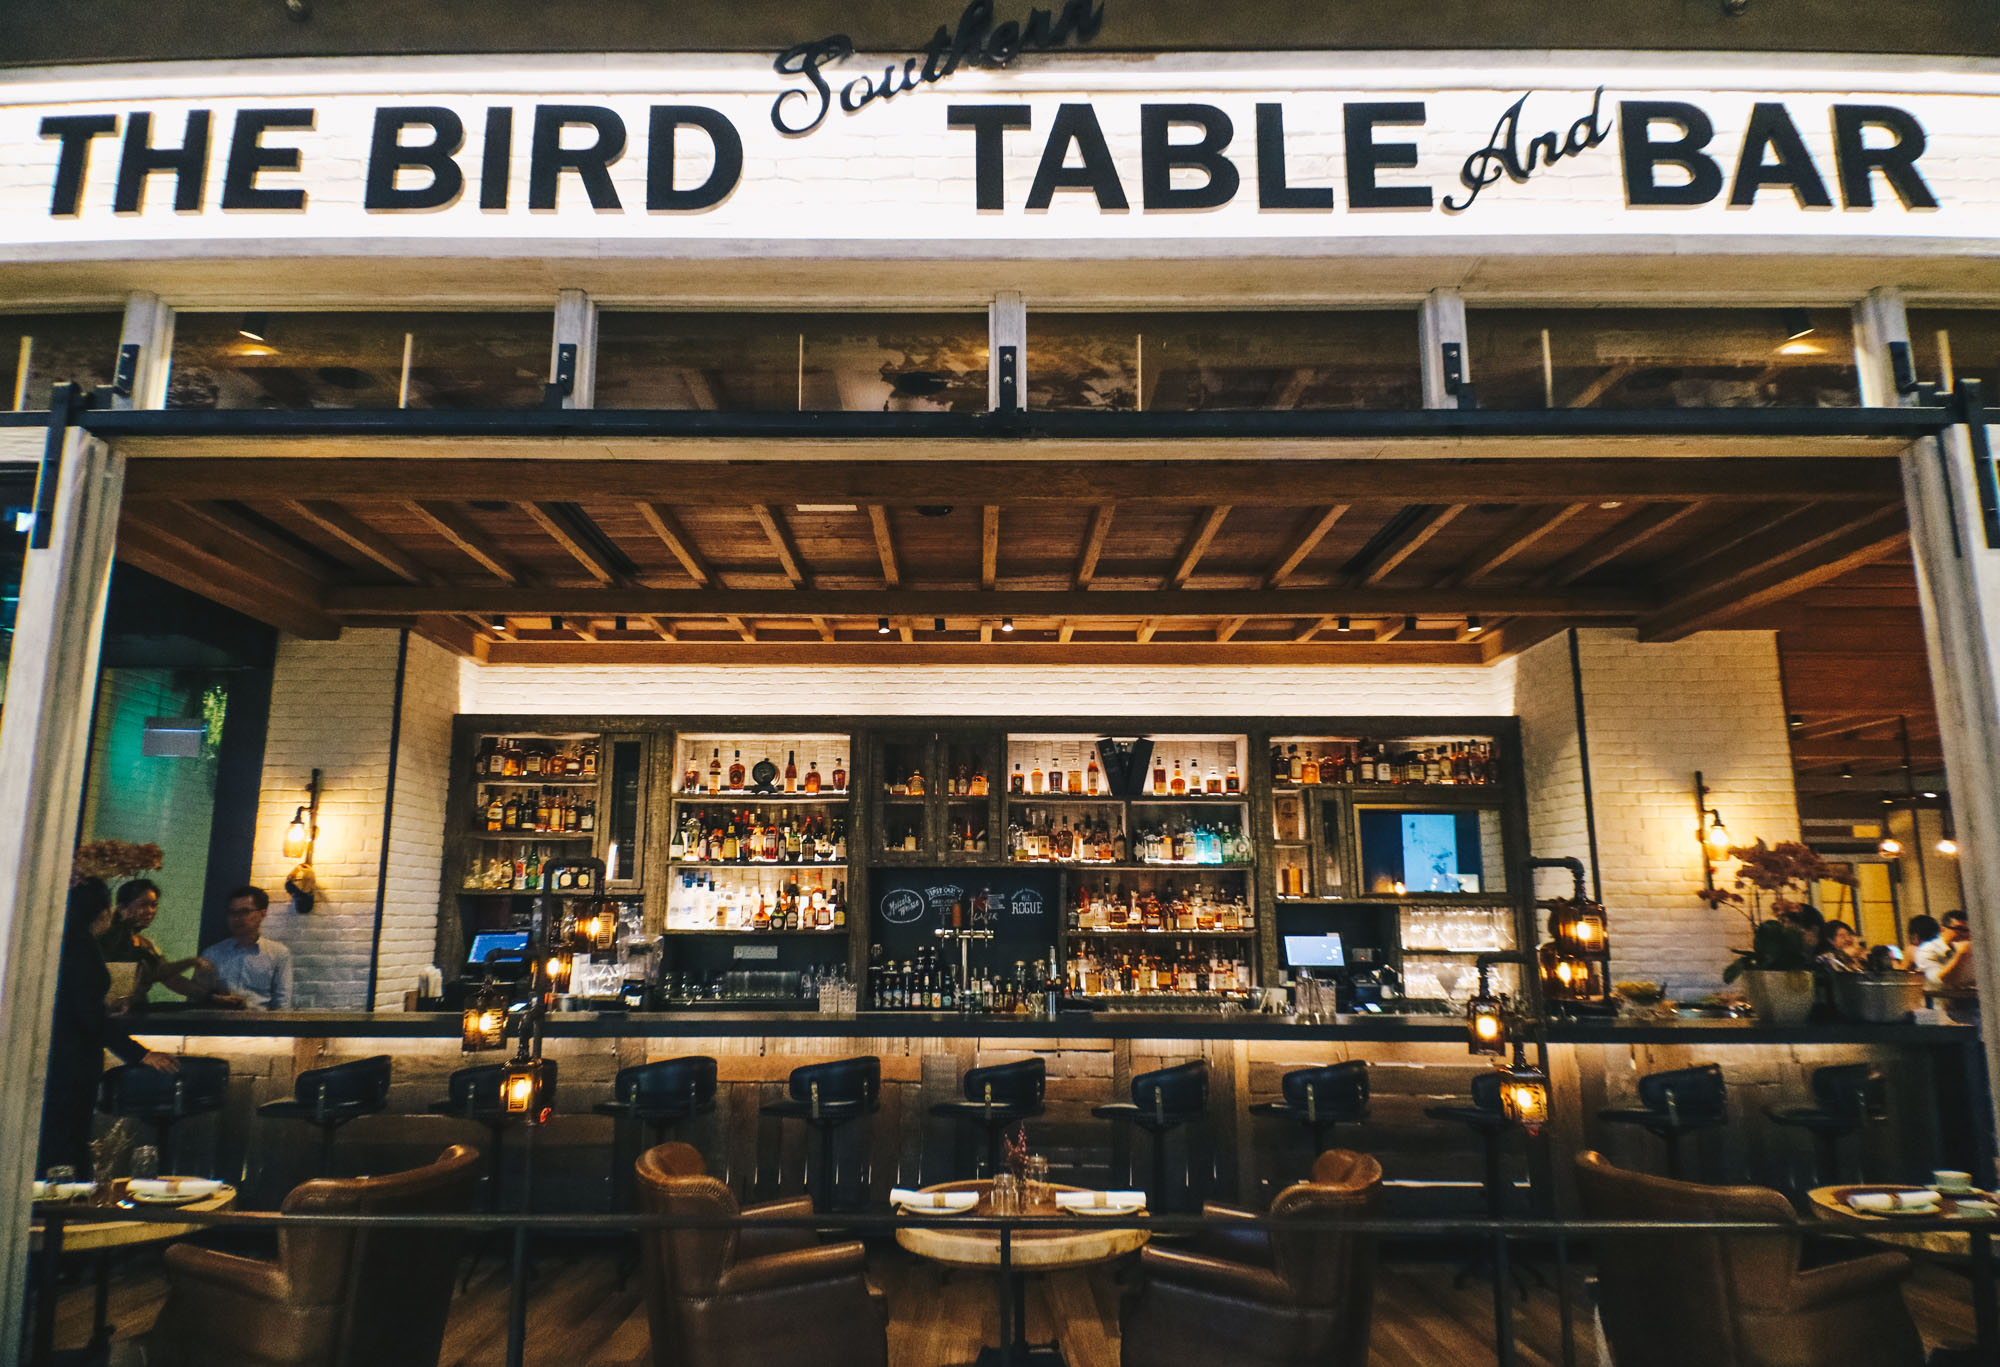 The Bird Southern Table And Bar - Southern Soul Food - Darren Bloggie 達人的部落格2000 x 1367